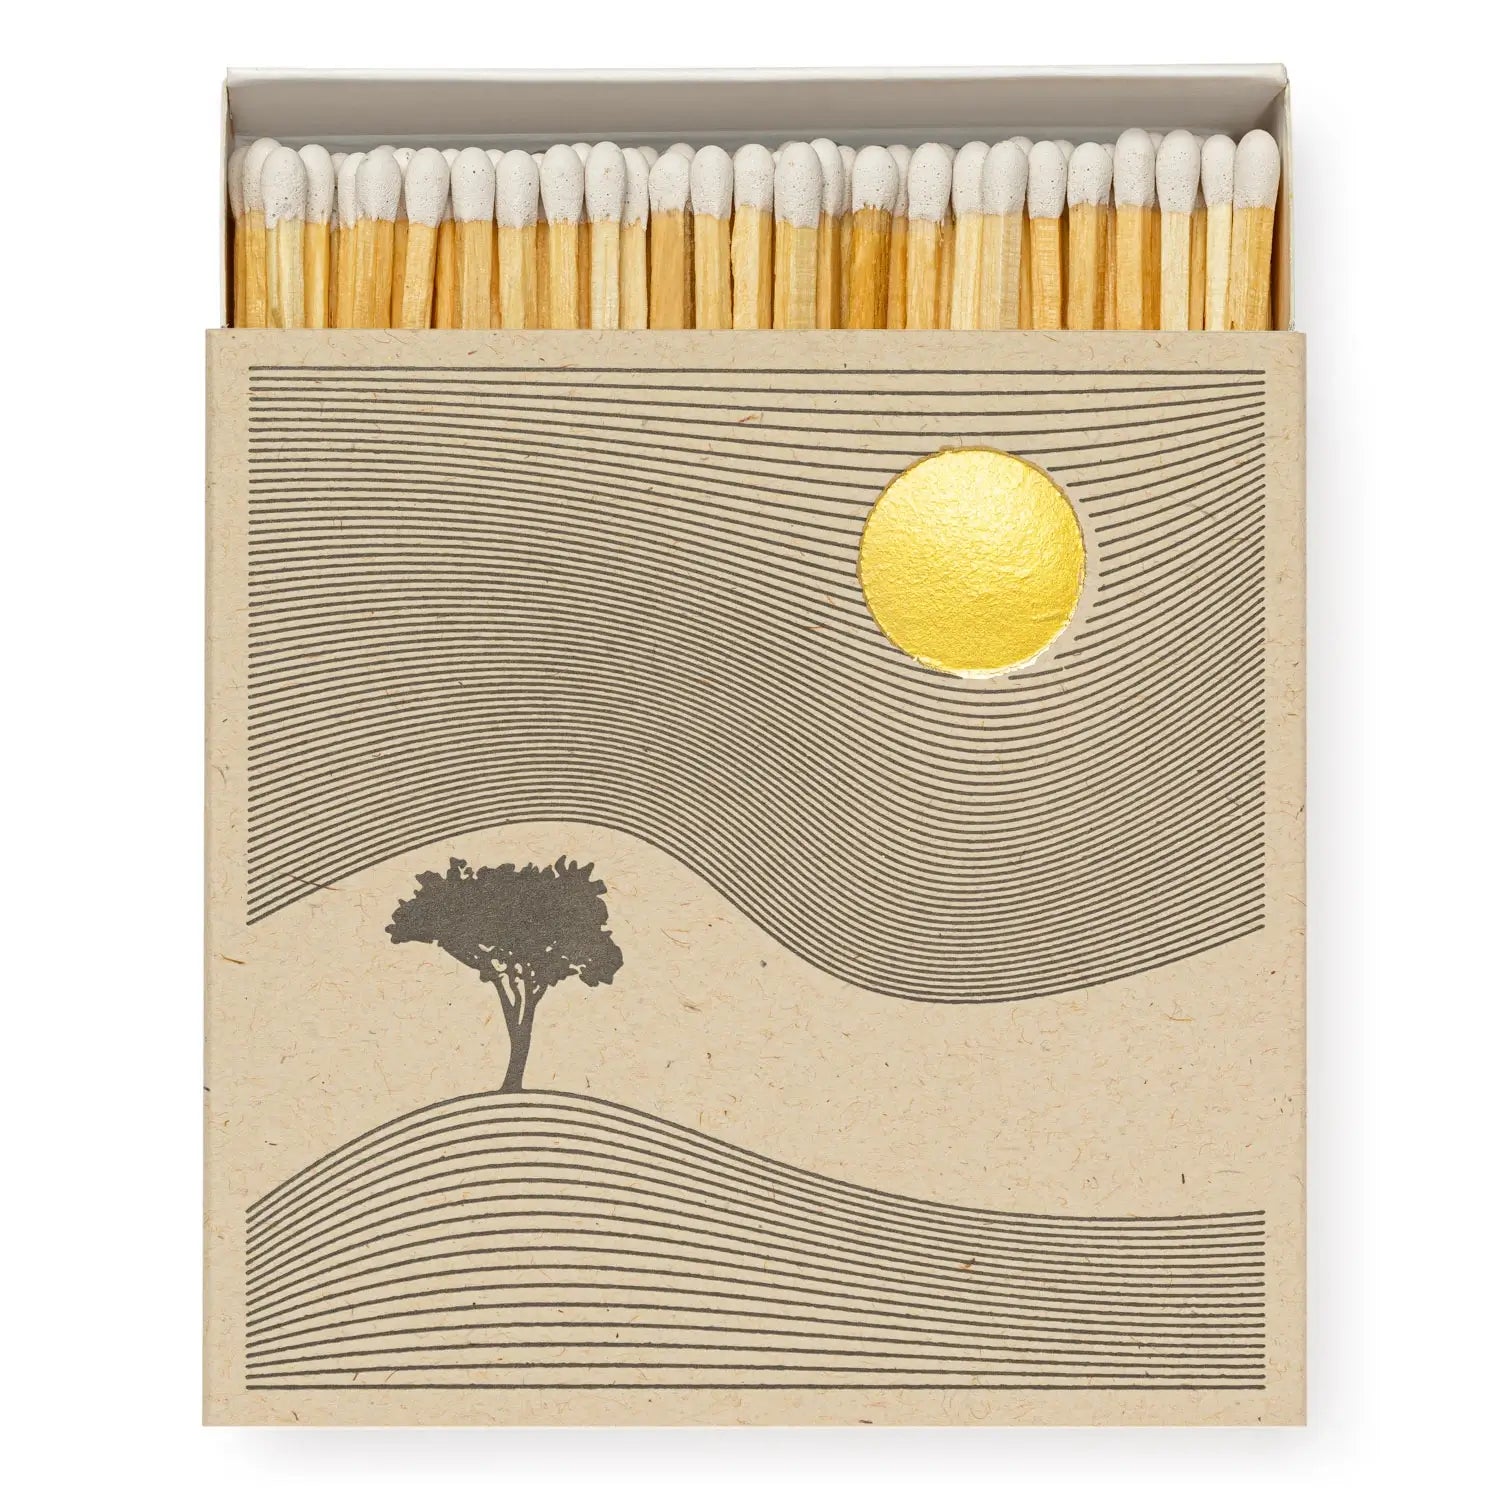 Long Matches - Square Box | One Tree Hill | by Archivist - Lifestory